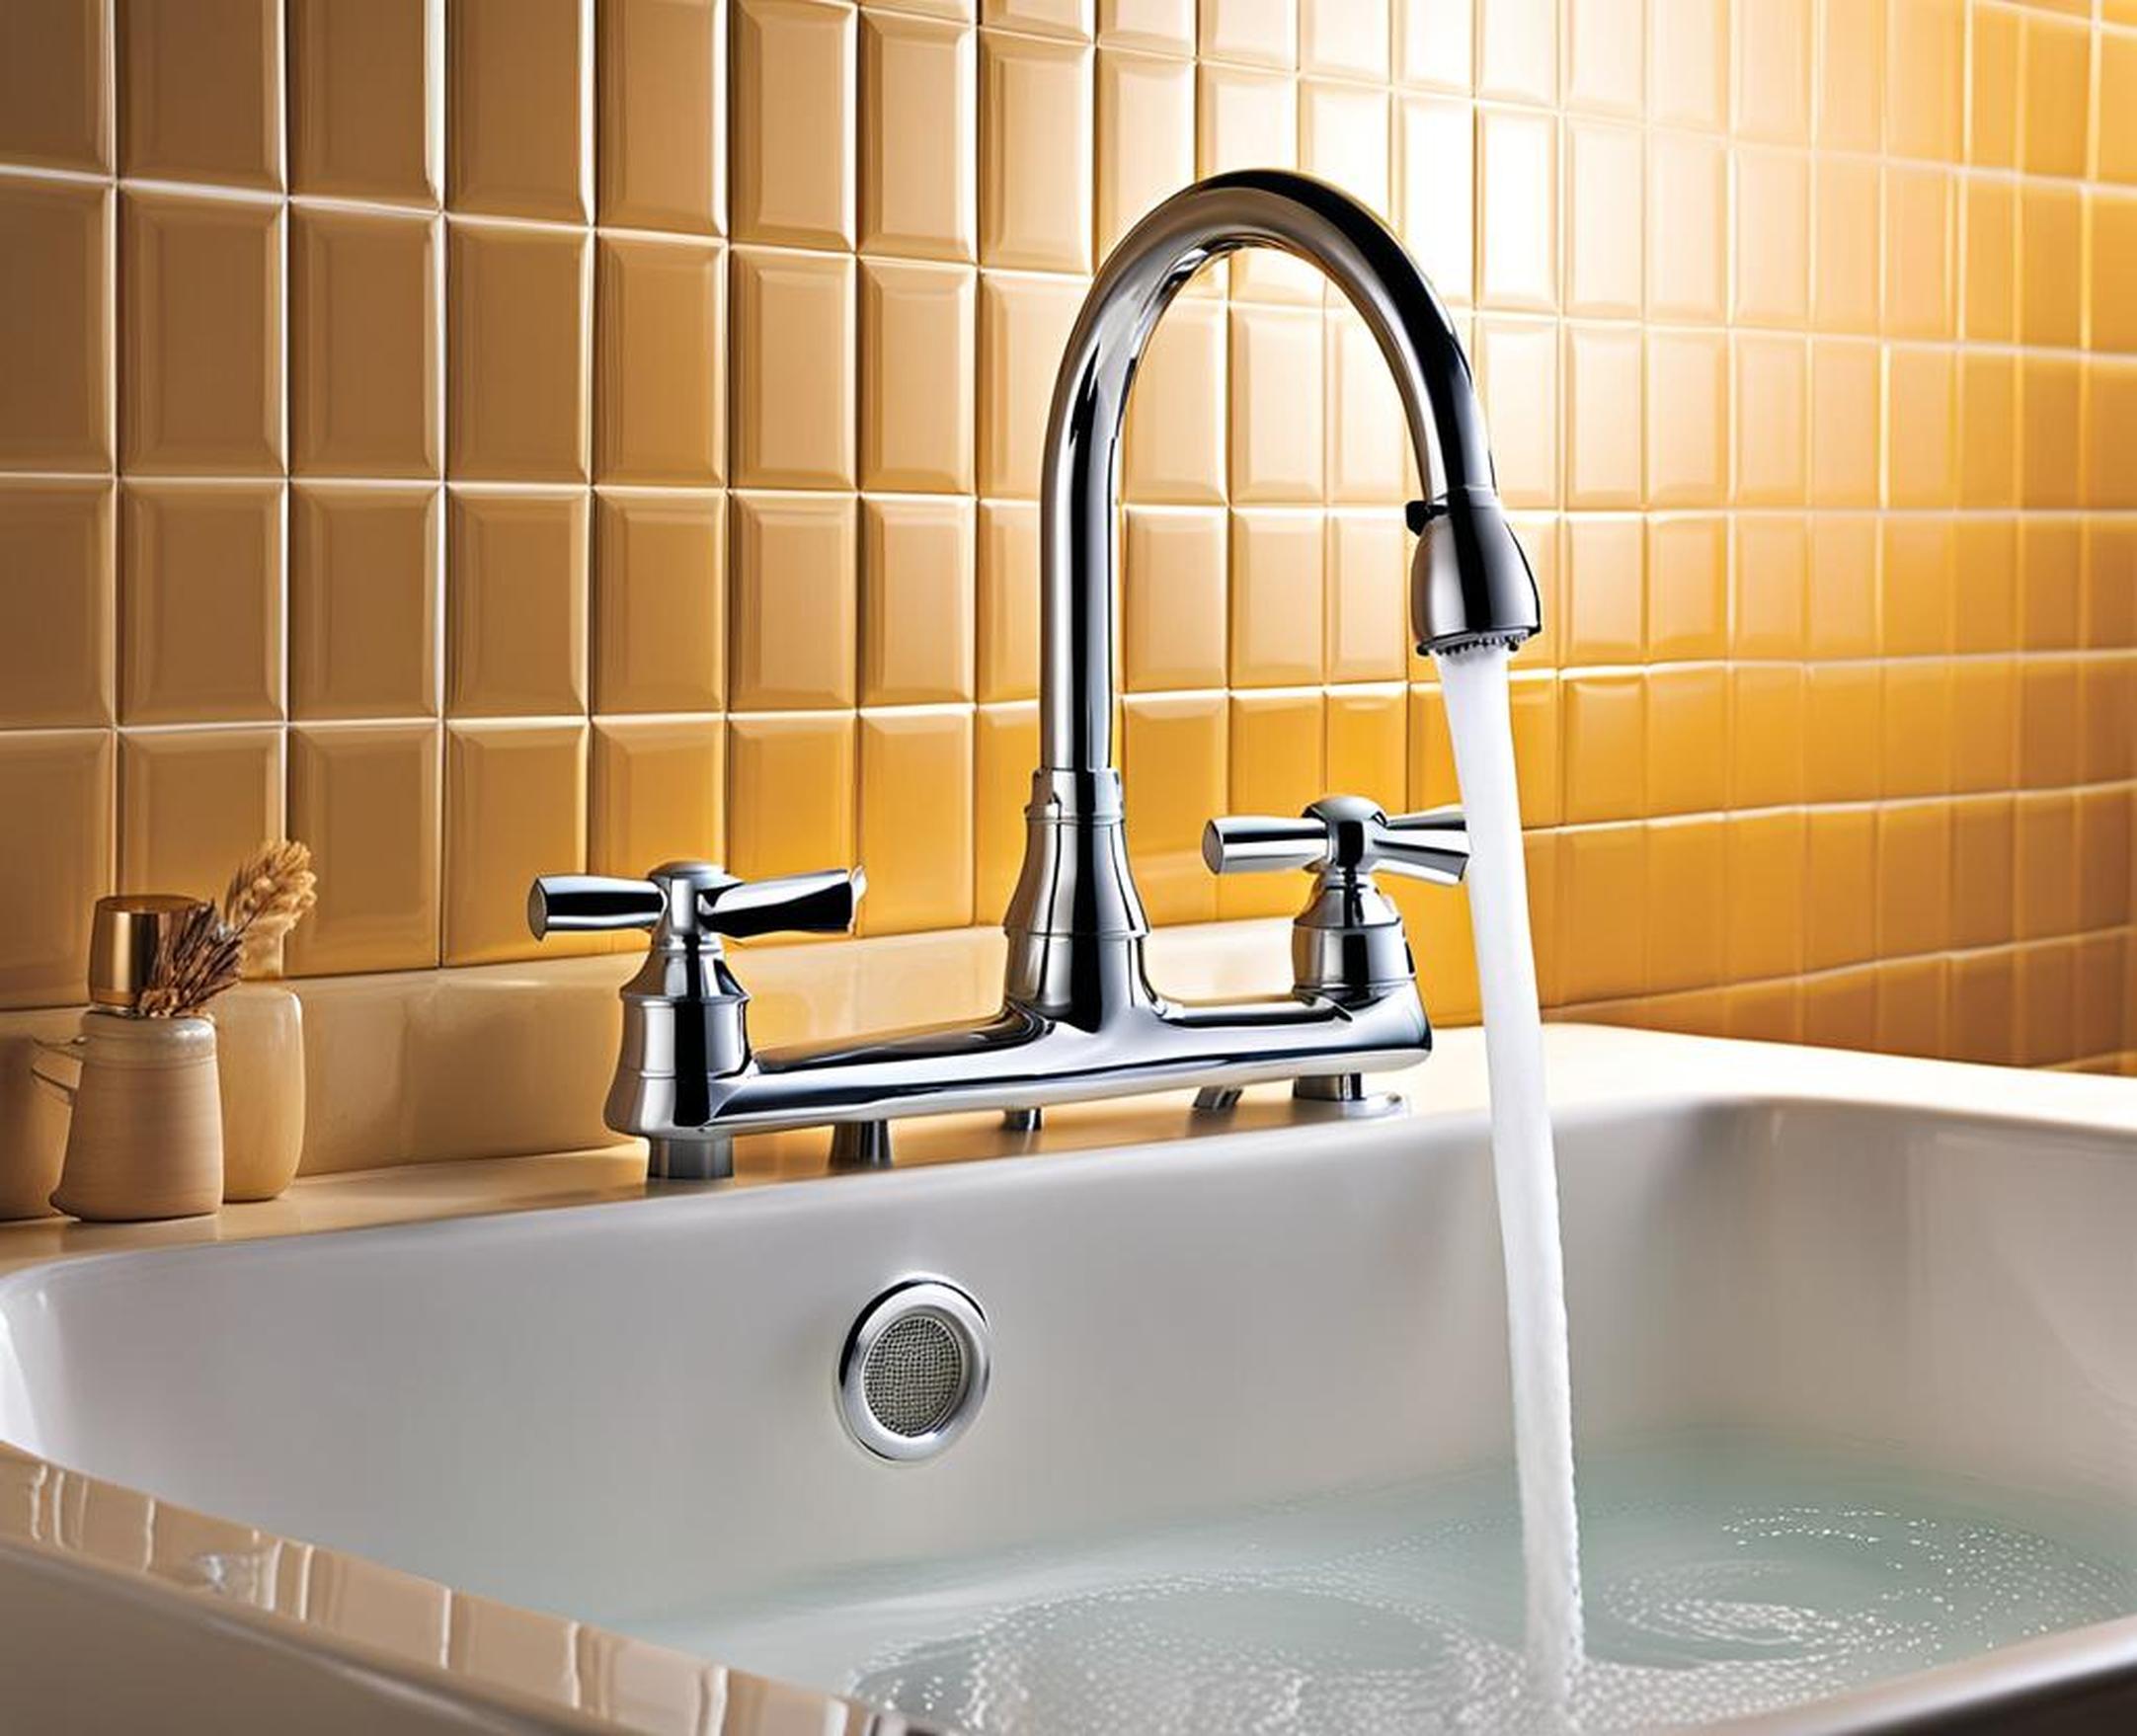 How To Get Hot Water Working Again In Some Faucets